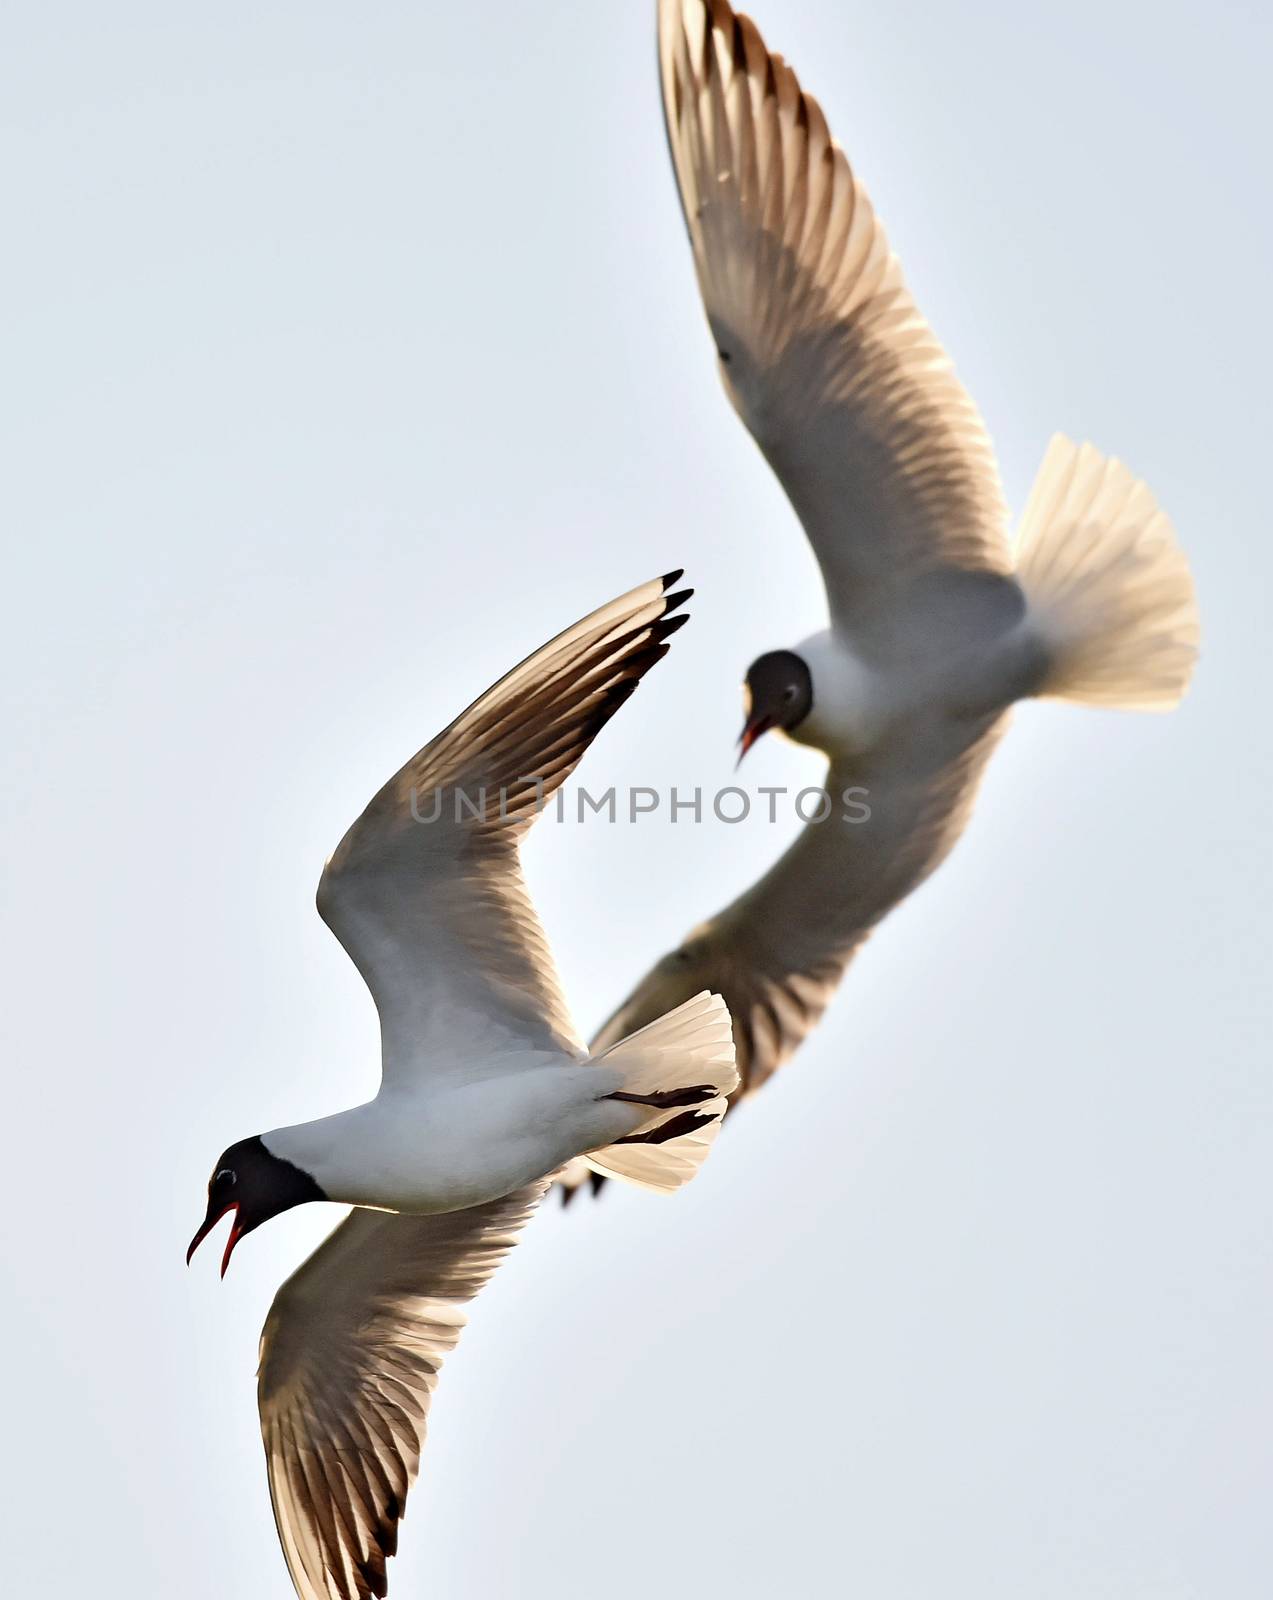 Adult black-headed gulls in fight, by SURZ